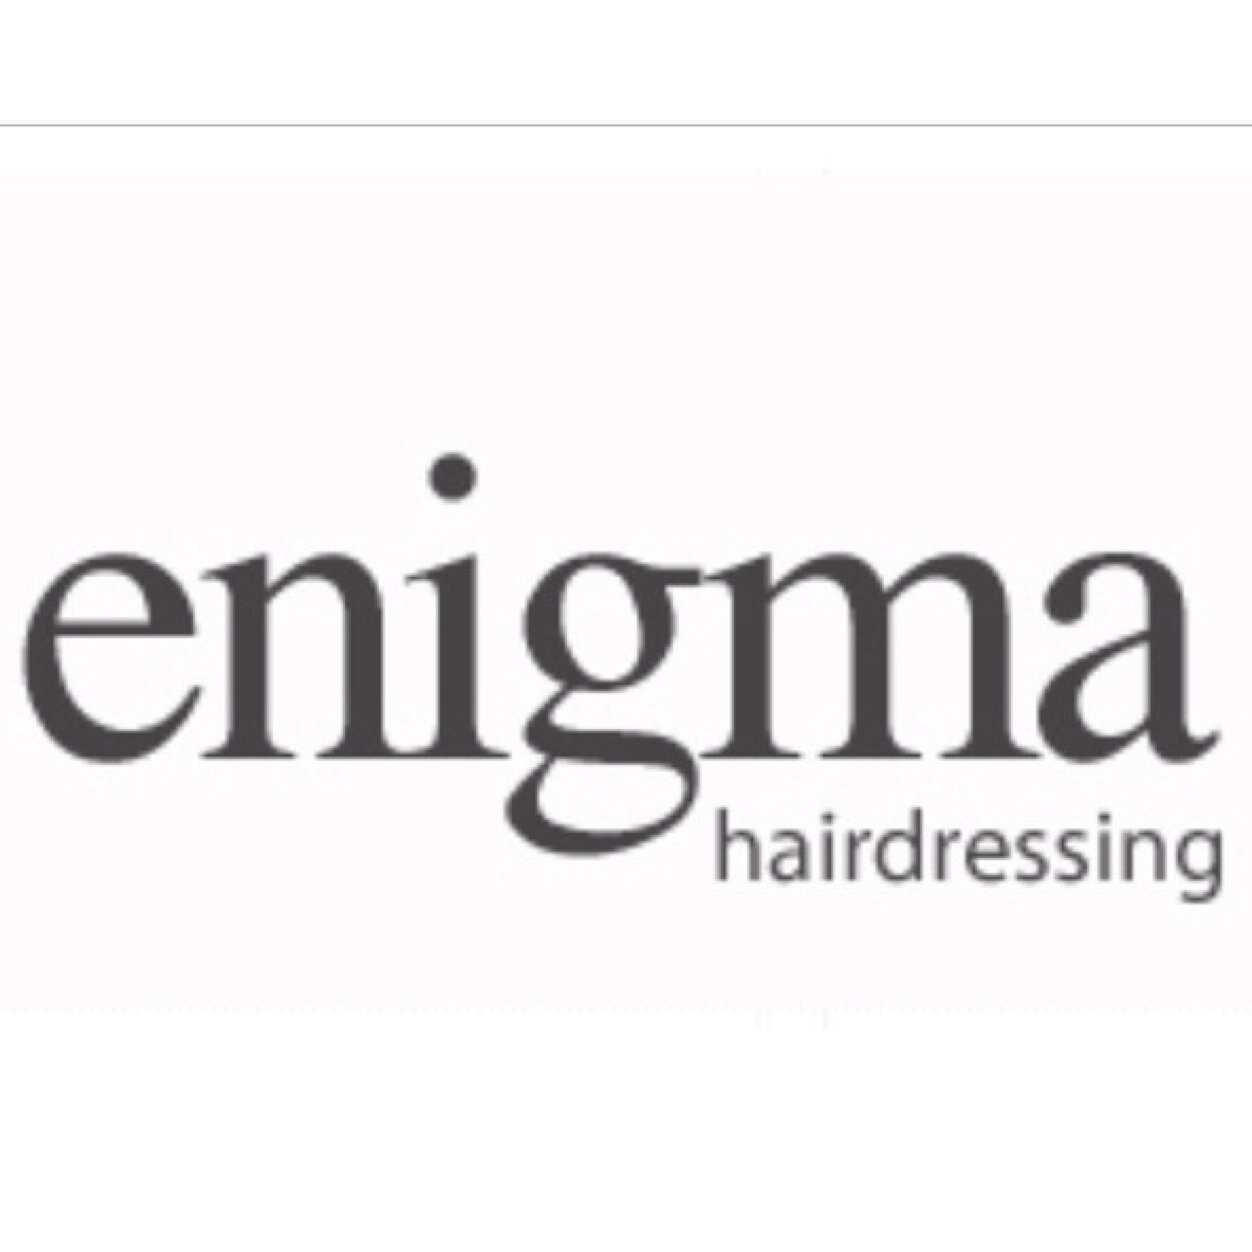 Enigma Hair Dressing salon situated in the heart of Llandudno contact us on 01492 877628